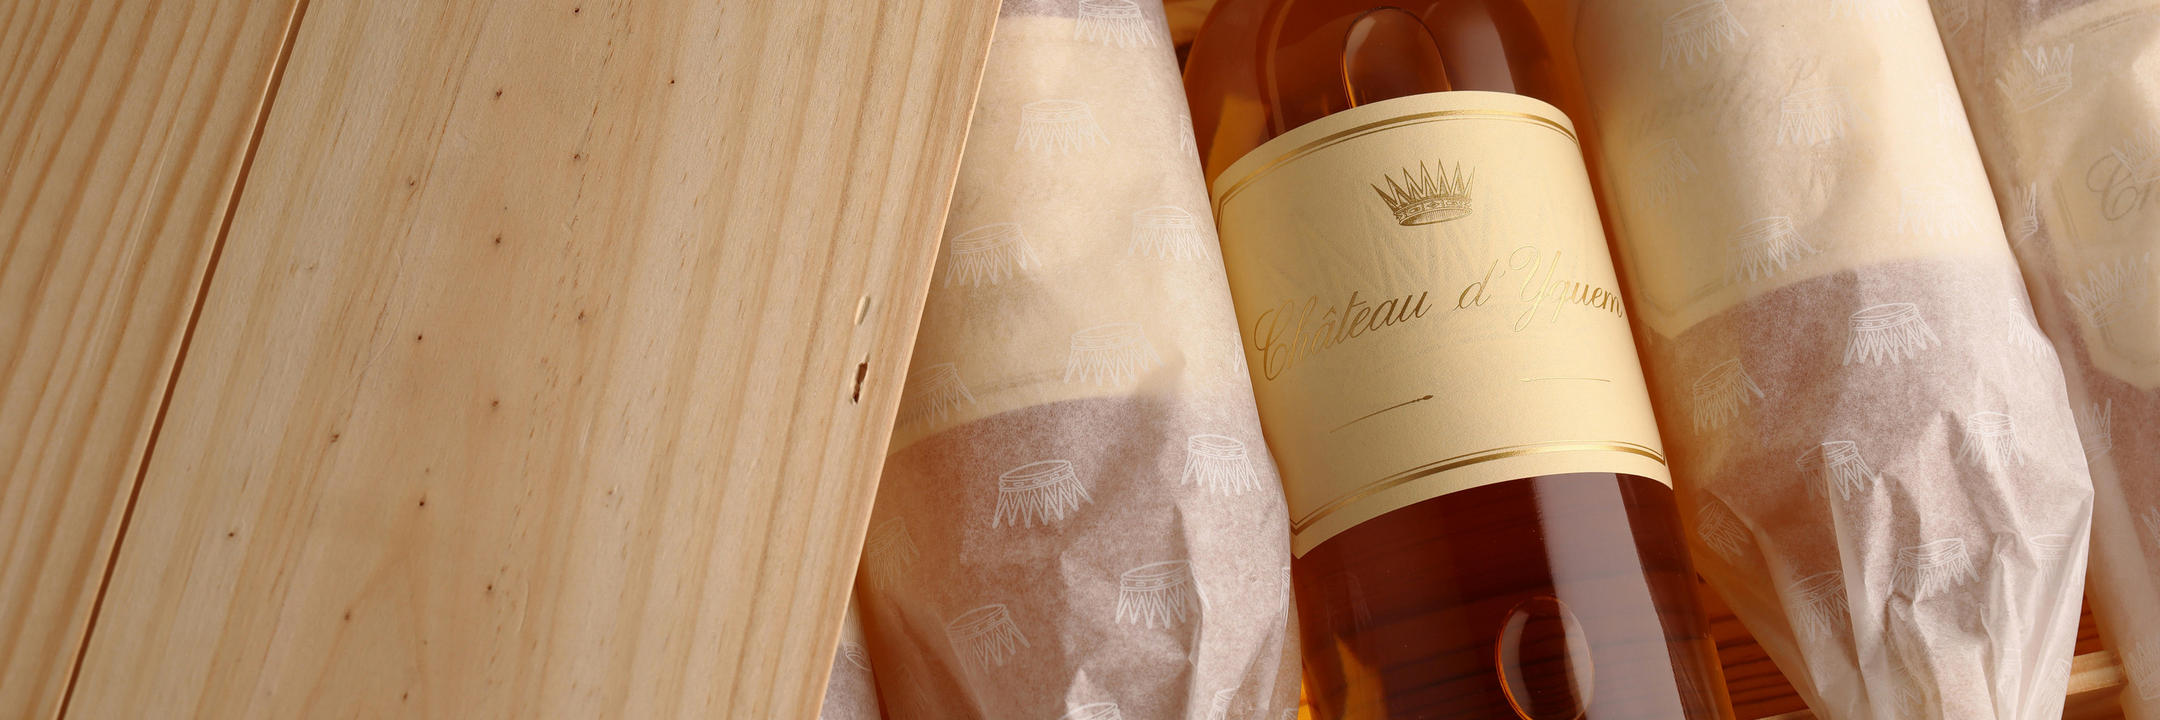 2020 Château d’Yquem - The latest release from the world’s<br>most prestigious sweet wine producer